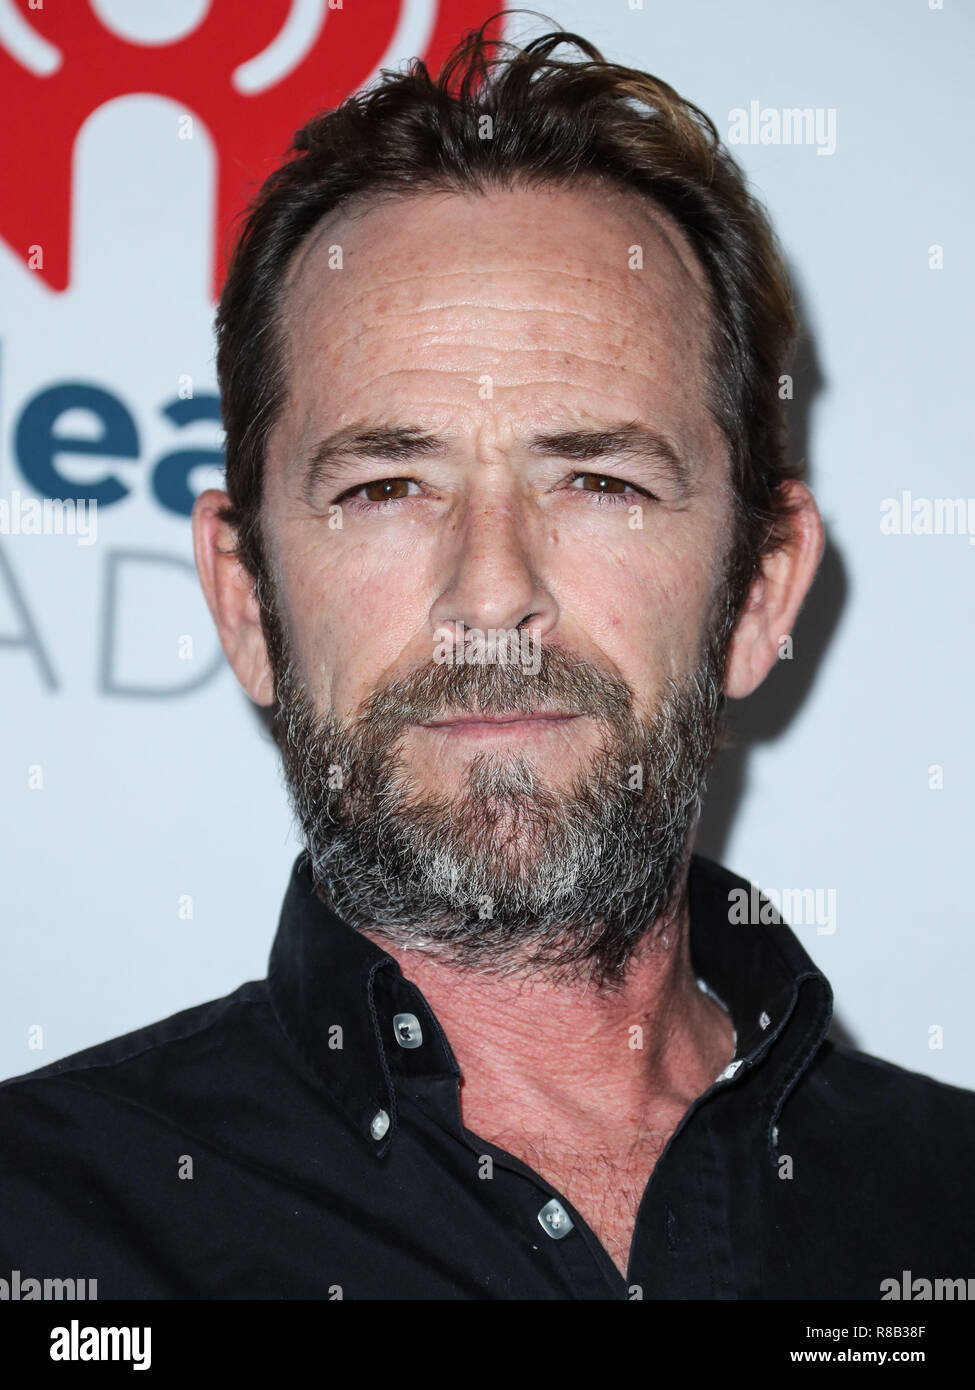 LAS VEGAS, NV, USA - SEPTEMBER 22: Luke Perry in the press room during the 2018 iHeartRadio Music Festival - Night 2 held at T-Mobile Arena on September 22, 2018 in Las Vegas, Nevada, United States. (Photo by Xavier Collin/Image Press Agency) Stock Photo